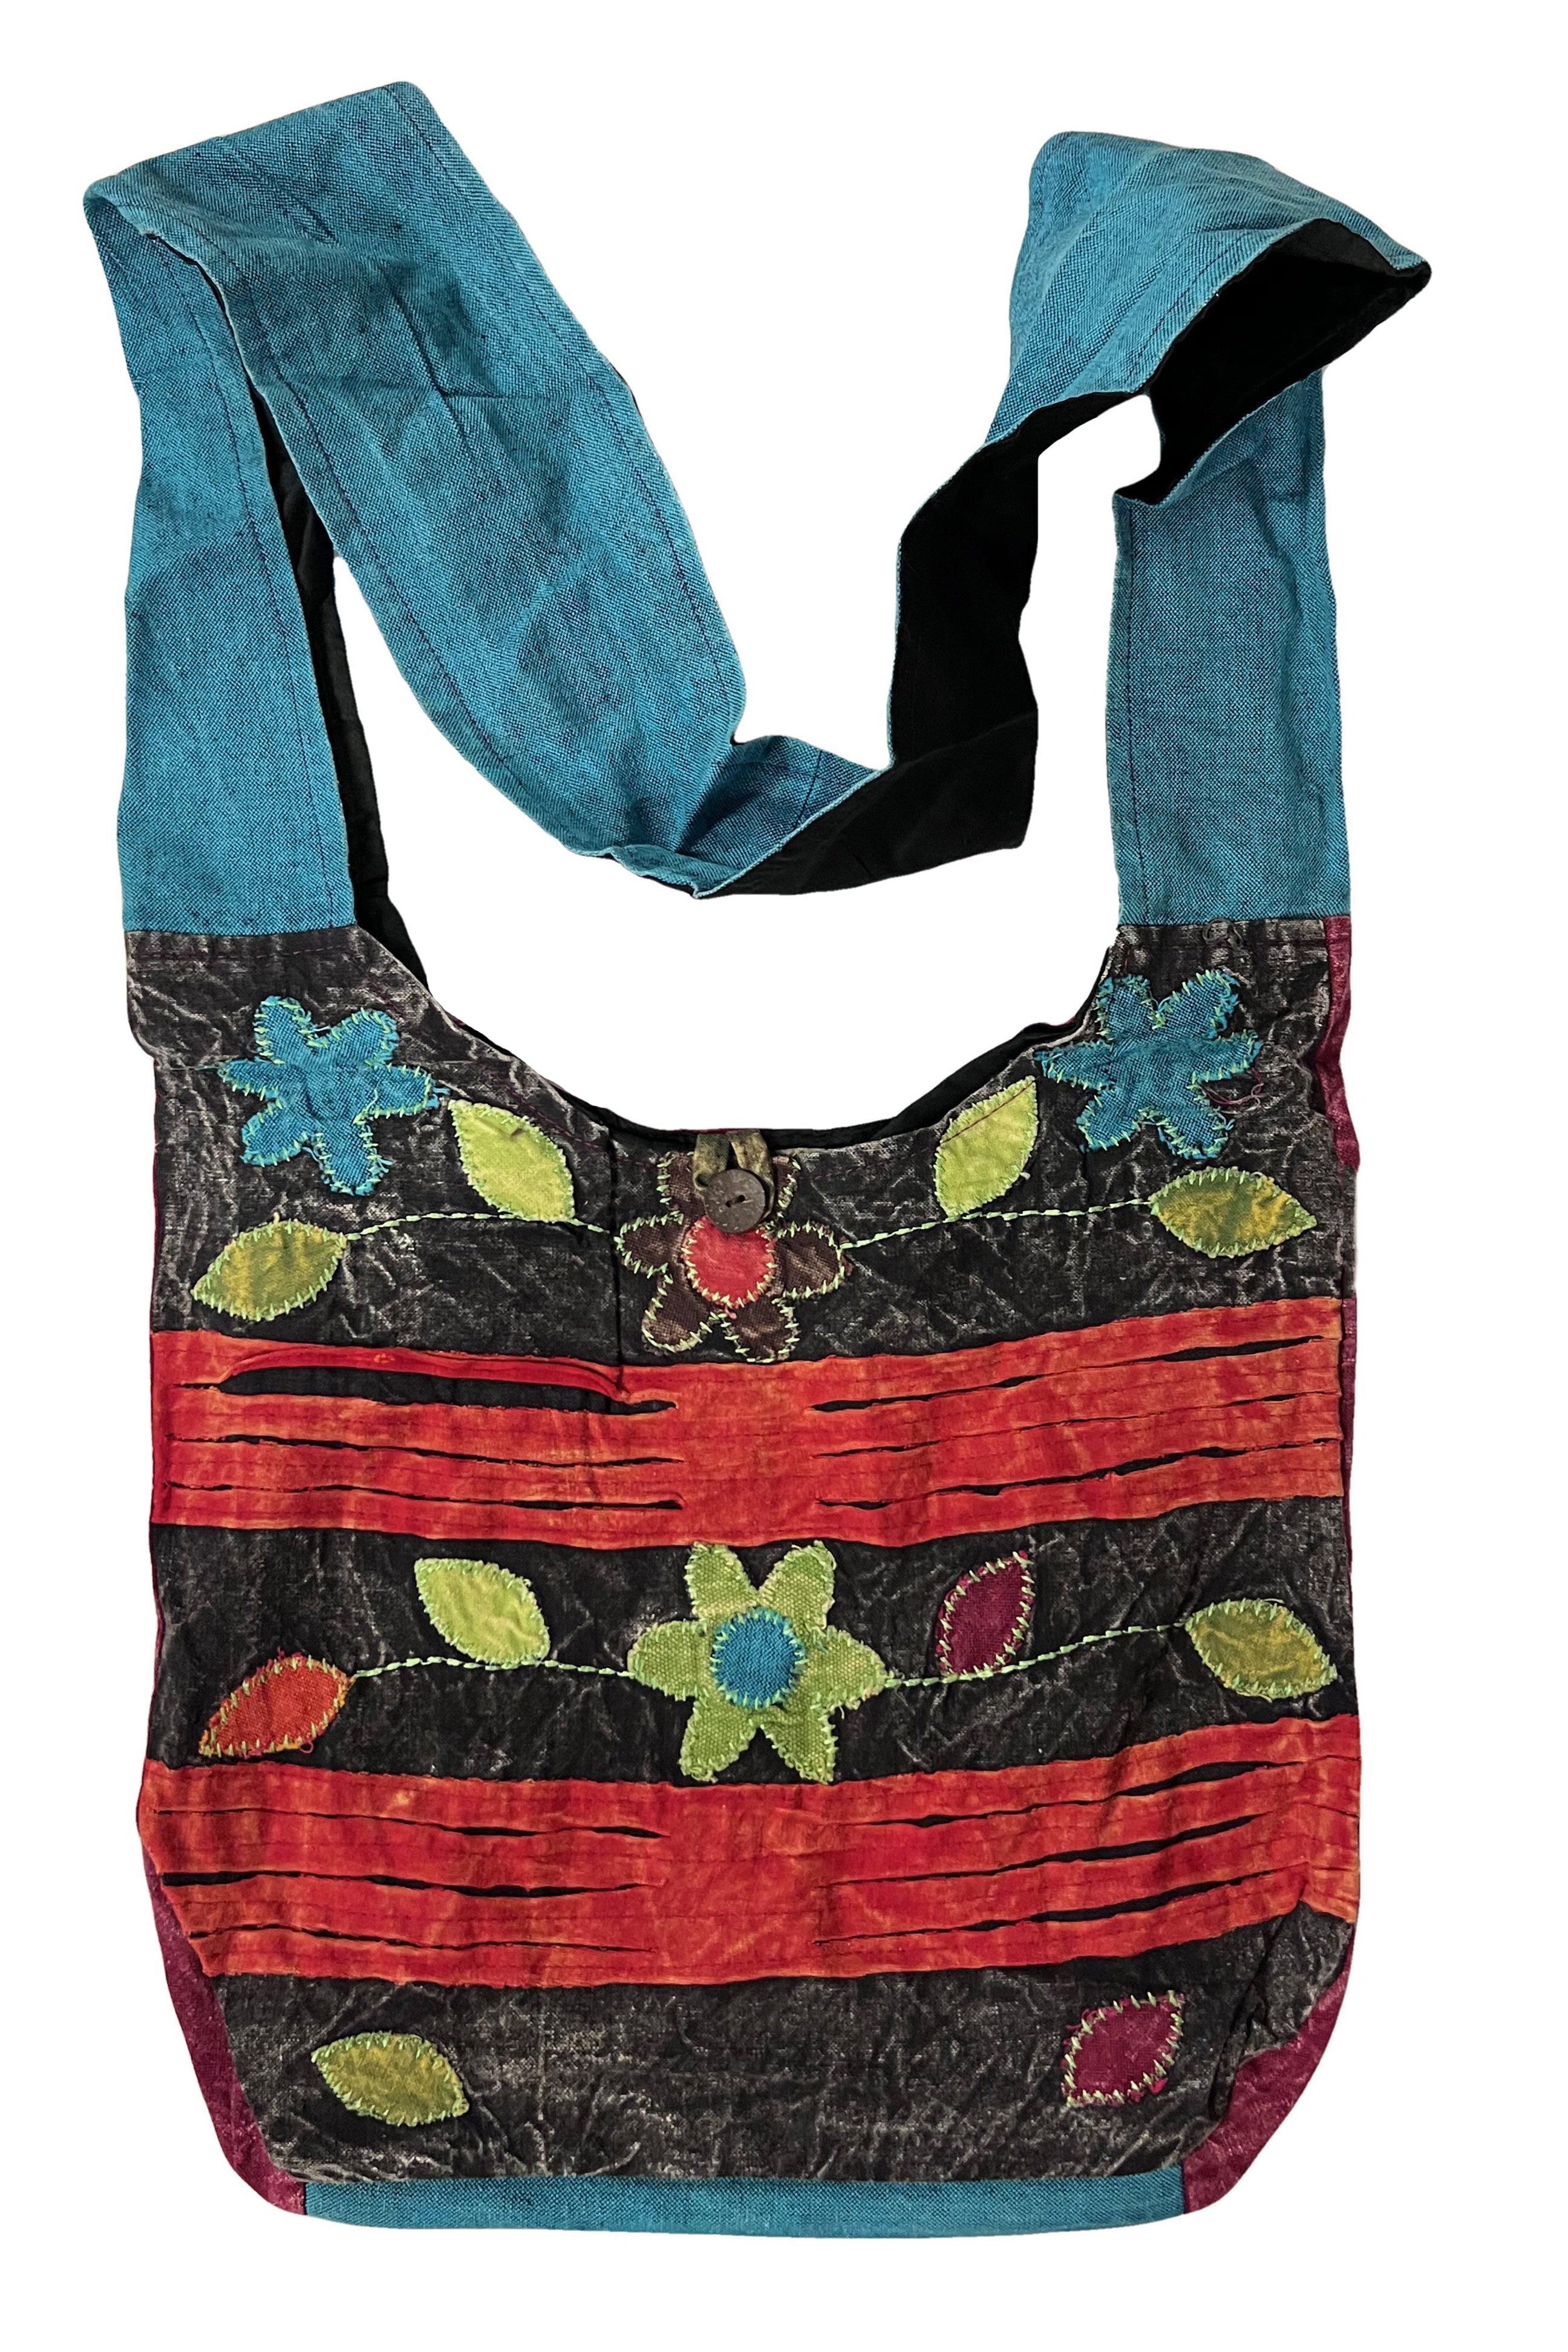 Hand Bag Boho Shoulder Bag Hippie Bag With Beautiful - Etsy | Hippie bags, Patchwork  bags, Bags